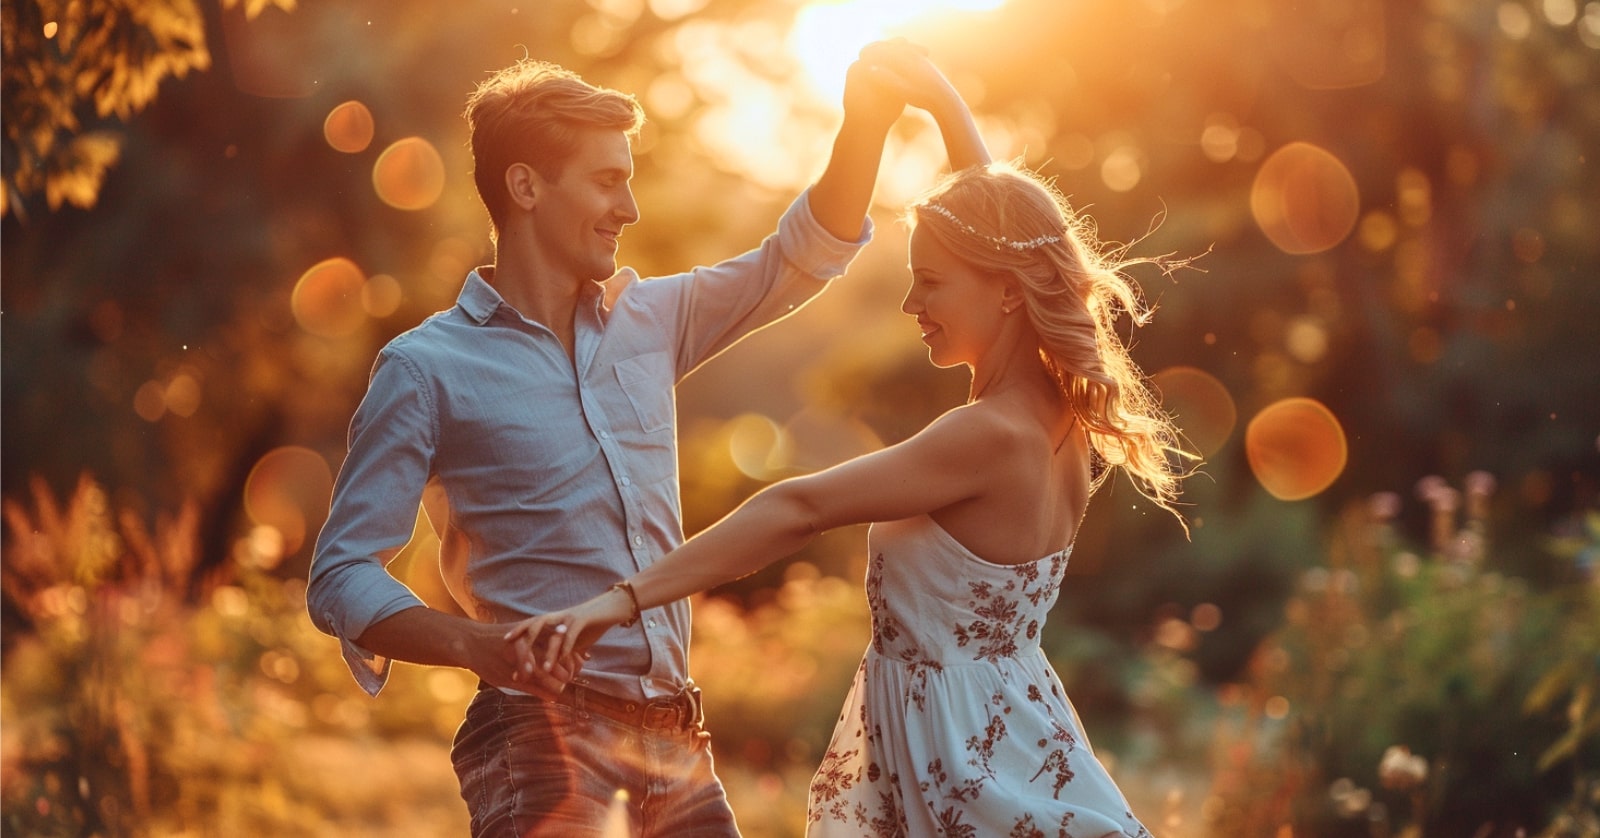 couple dancing together in casual clothes while surrounded by nature in the late evening sun